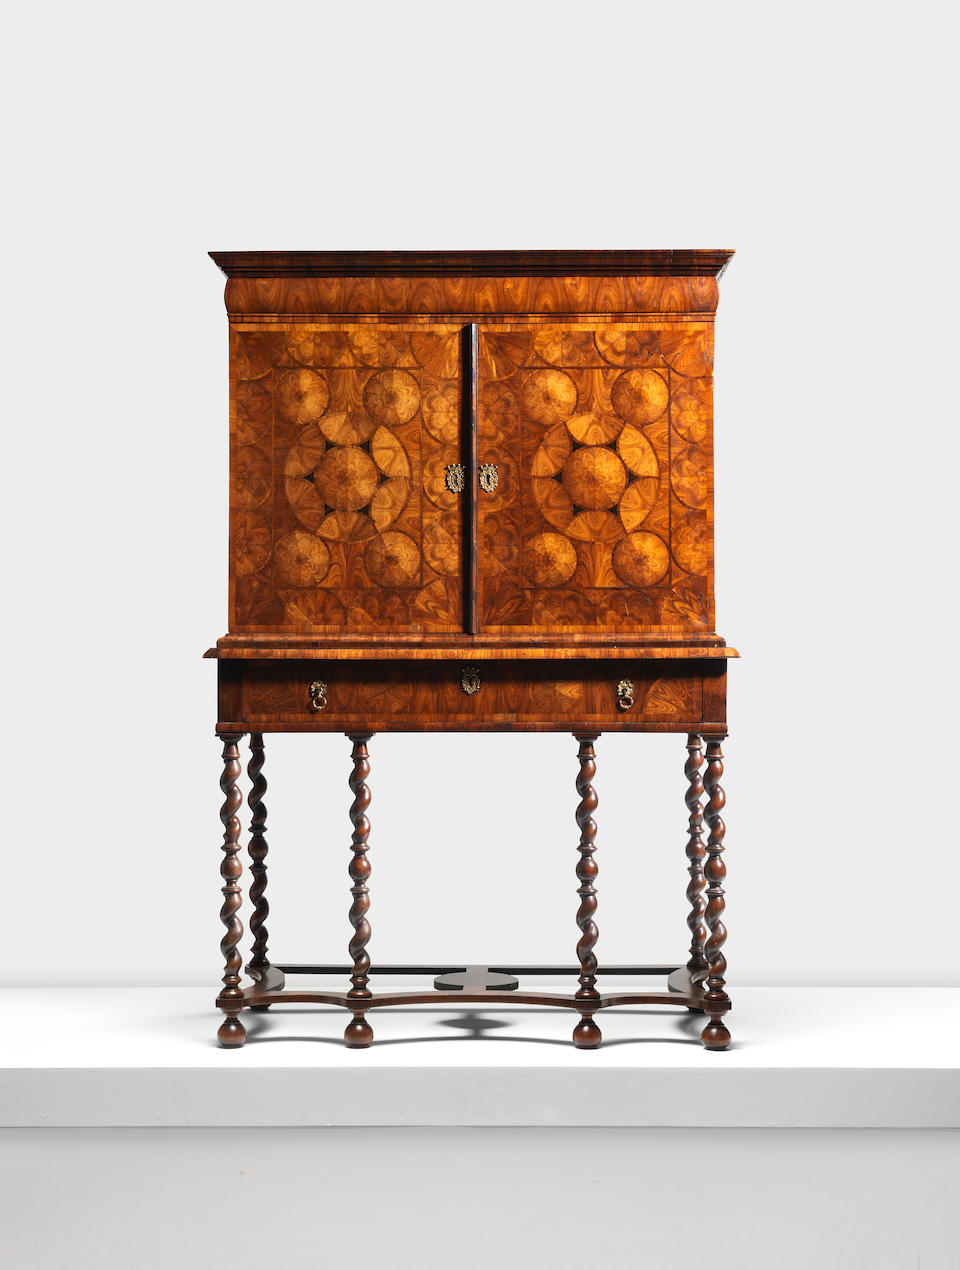 A William and Mary kingwood, oyster veneered and ebony inlaid cabinet on a later stand Circa 1690, the cabinet in the manner of Thomas Pistor